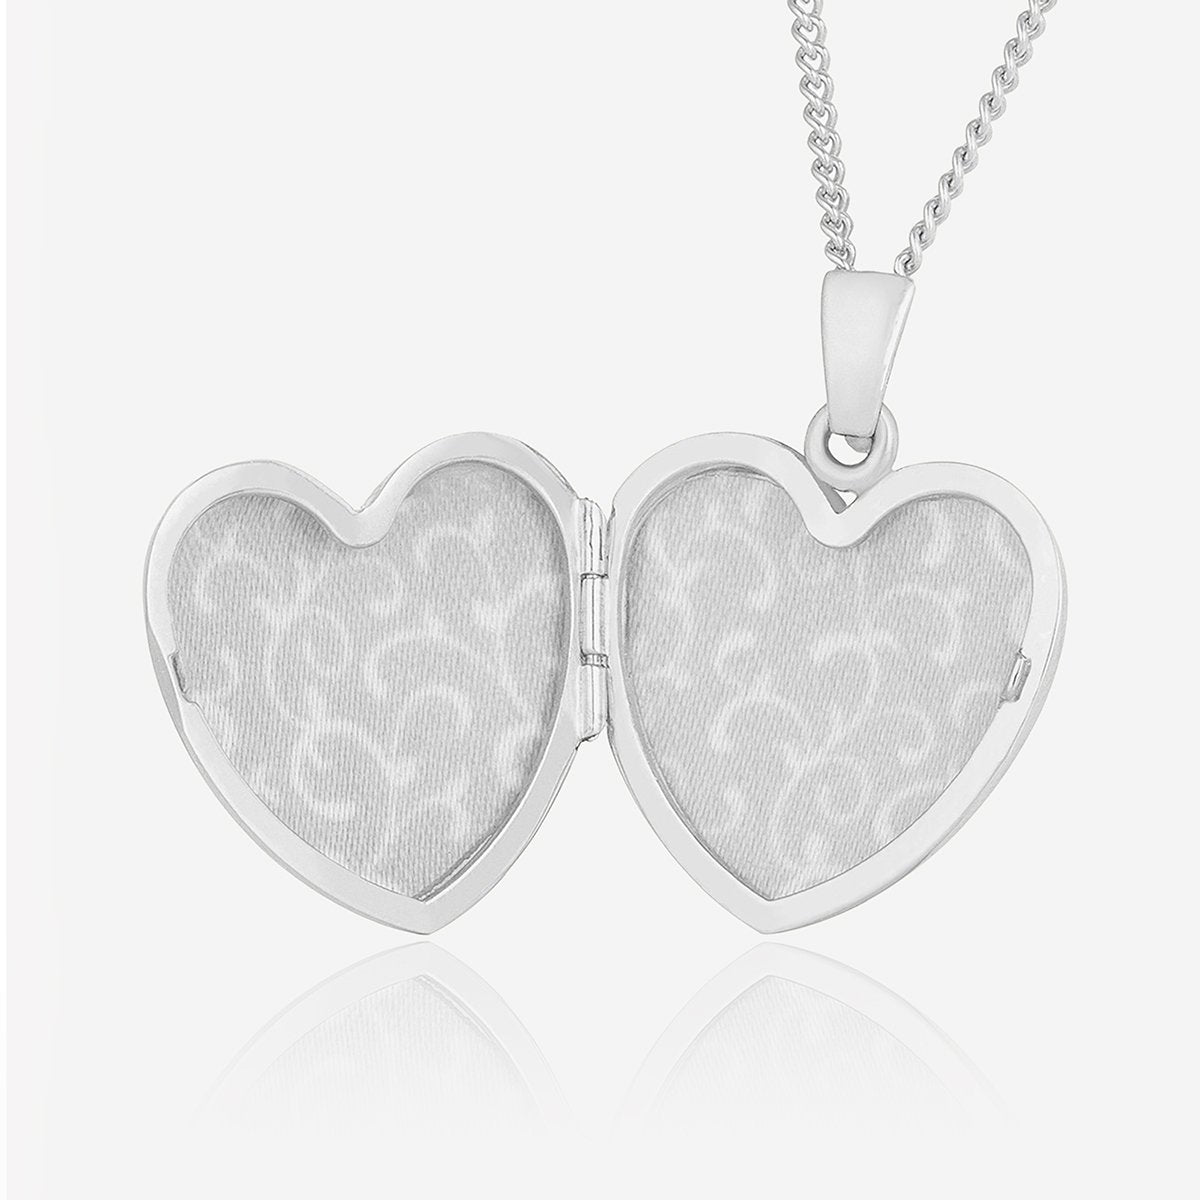 Product title: Premium Silver Heart Locket, product type: Locket